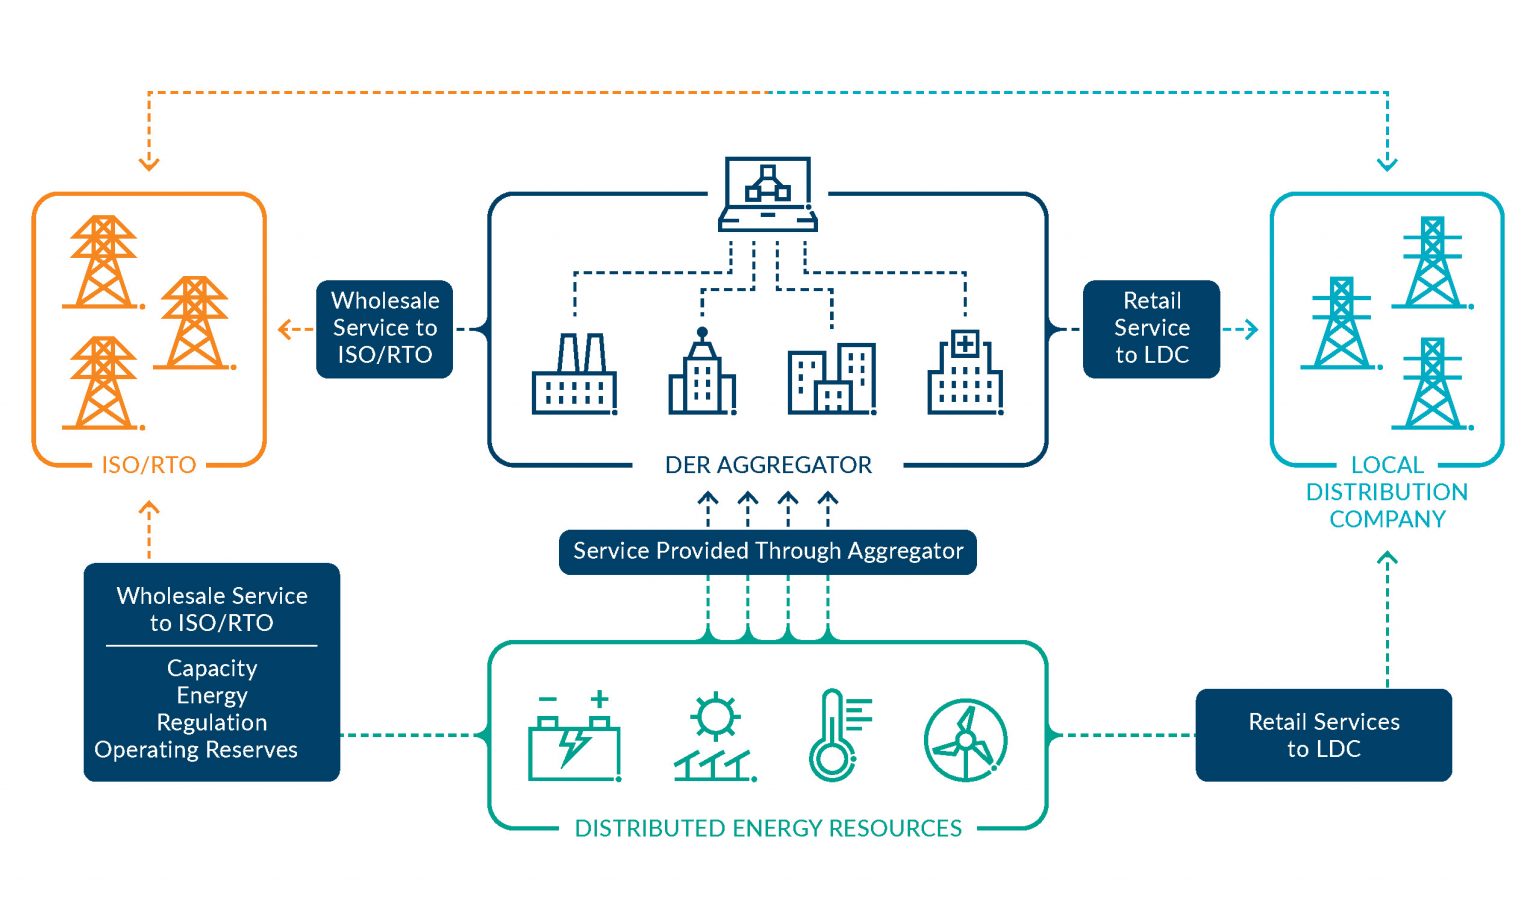 FERC Order 2222 Levels the Playing Field for Distributed Energy